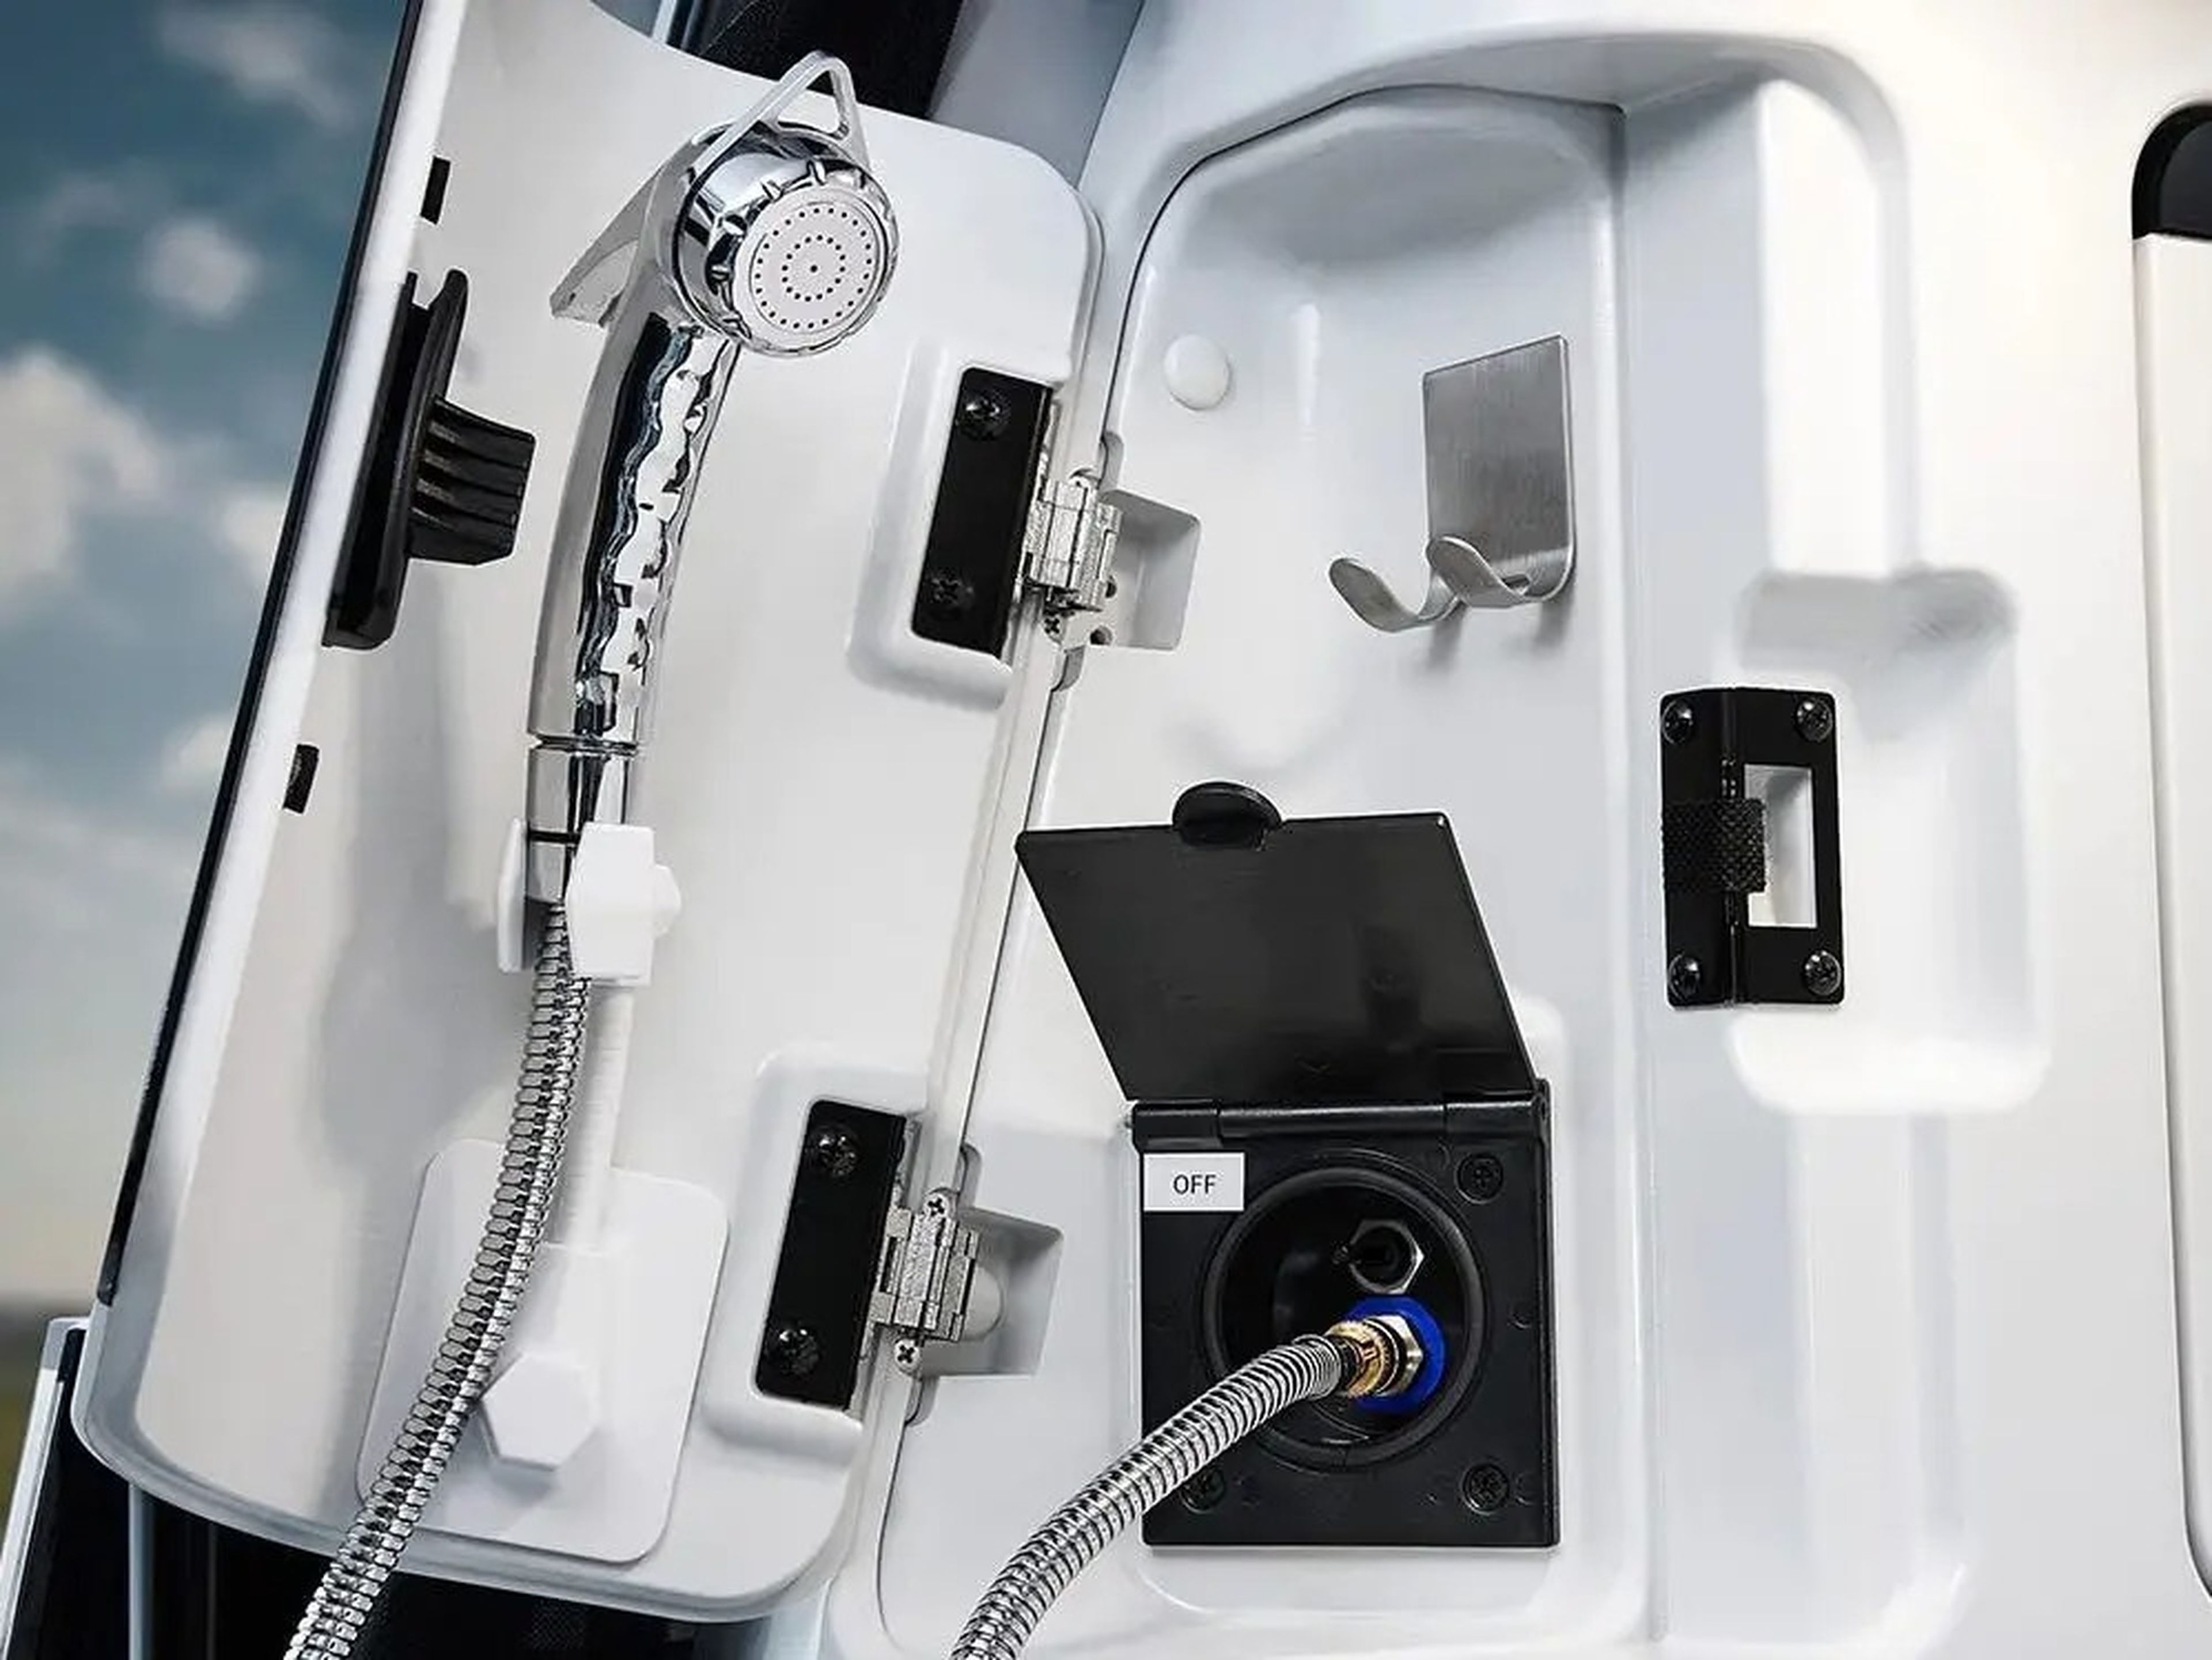 The Hyundai Staria Lounge Camper's shower system with a movable shower head.